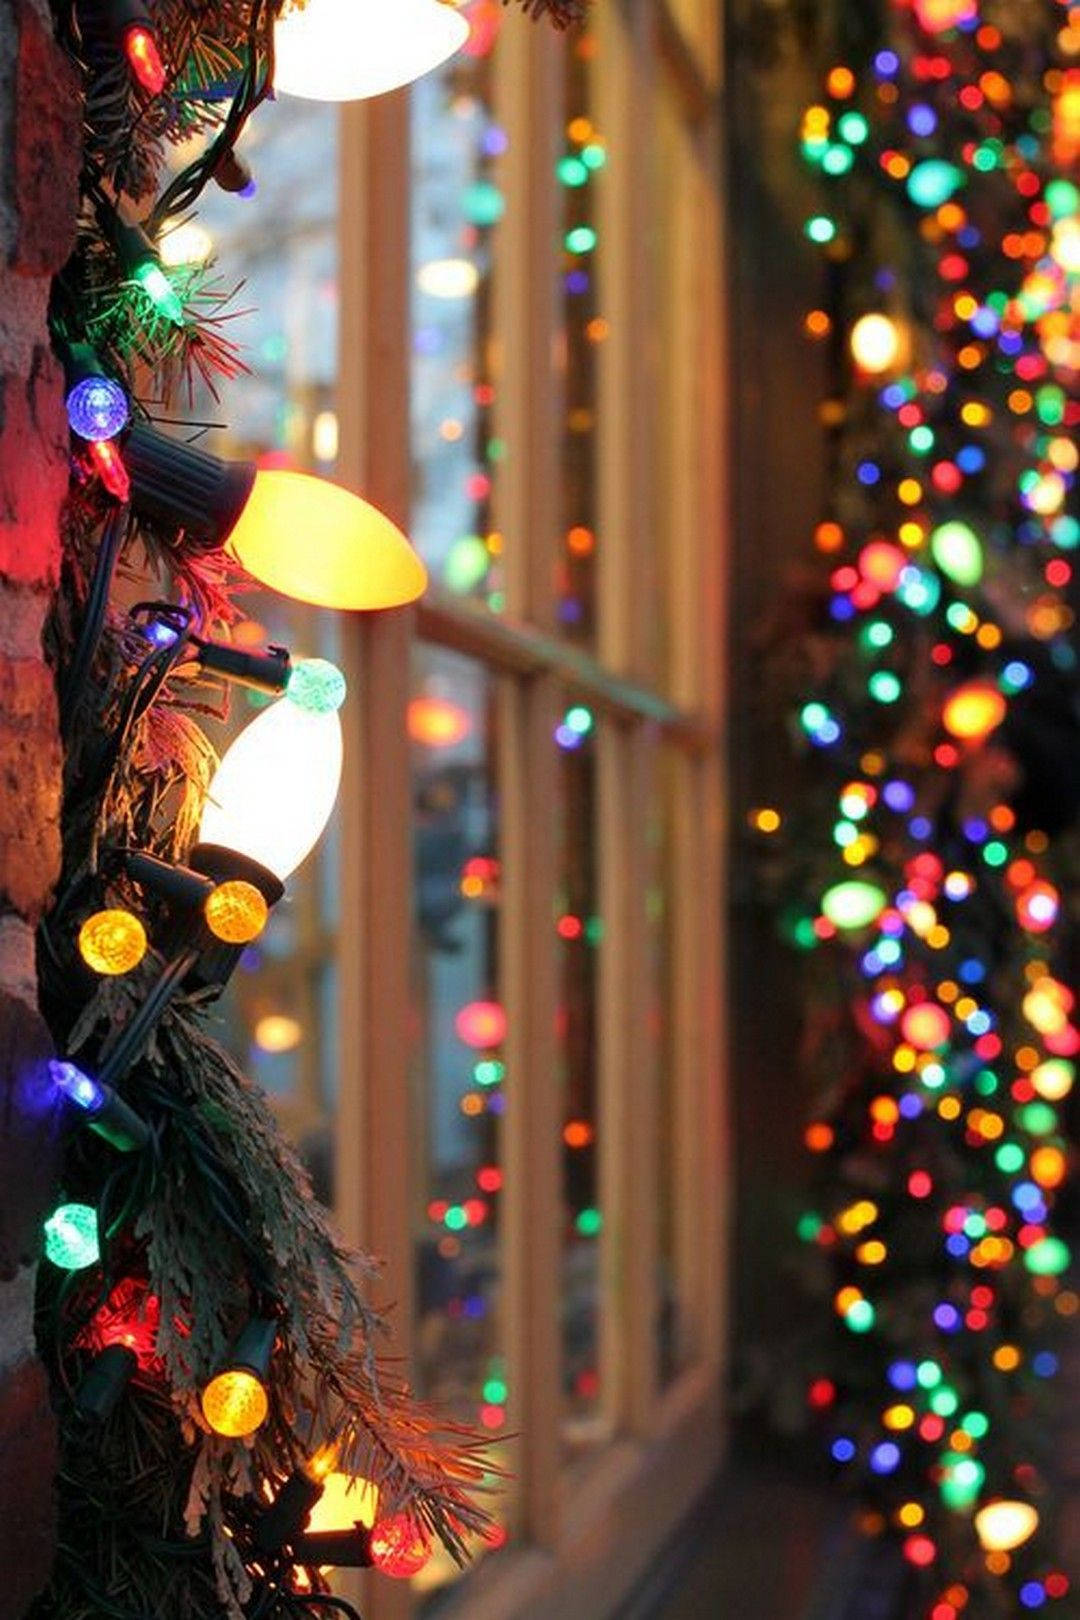 Enjoy your Christmas this year in spectacular style with beautiful lights. Wallpaper